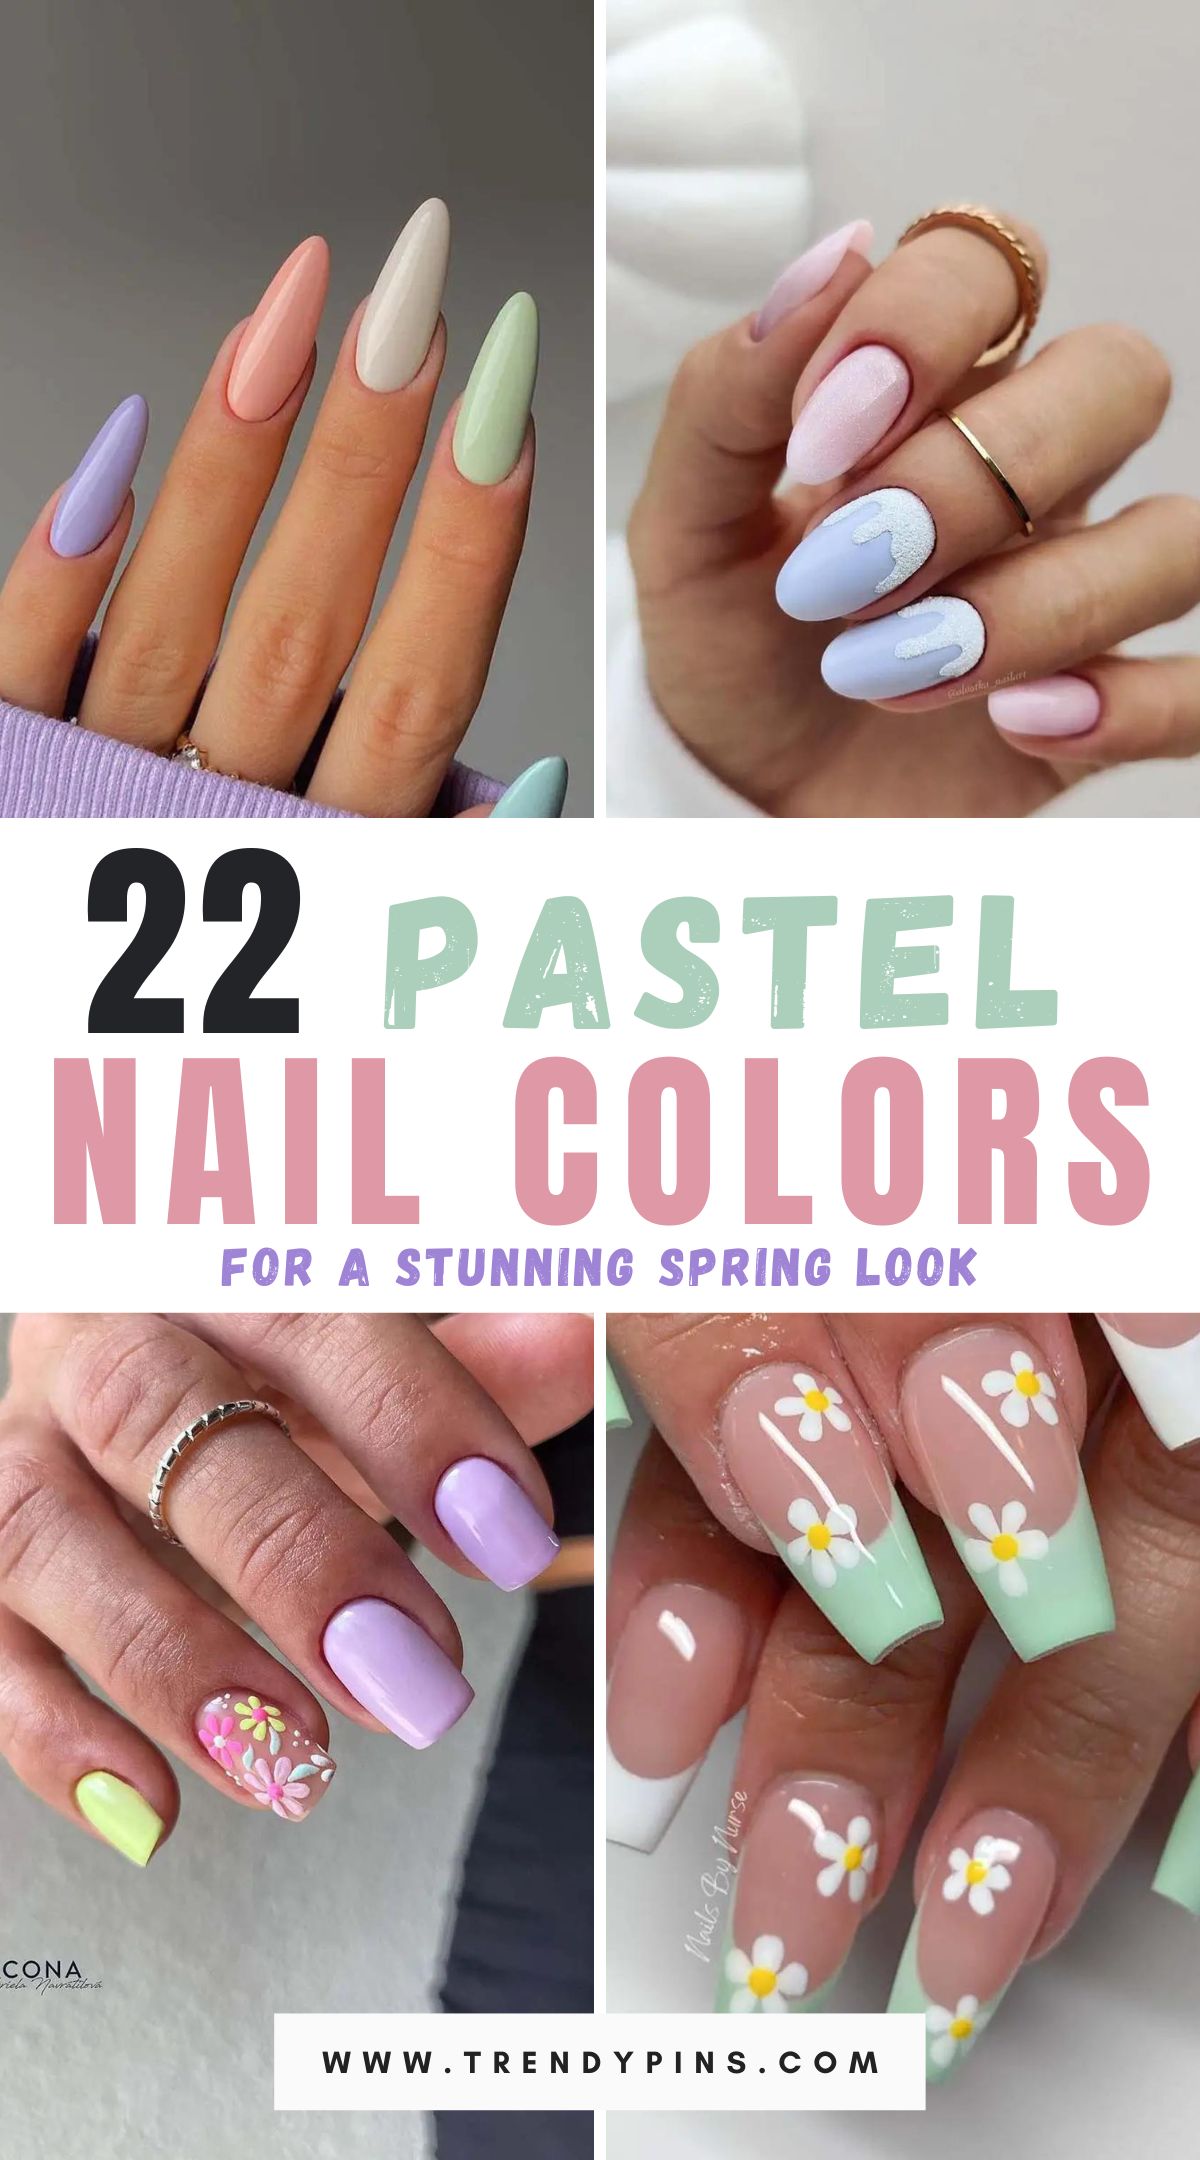 Welcome the beauty of spring with our selection of 22 pastel perfection nail colors you must try. Explore a spectrum of soft and dreamy hues that will add a touch of seasonal elegance to your manicure.